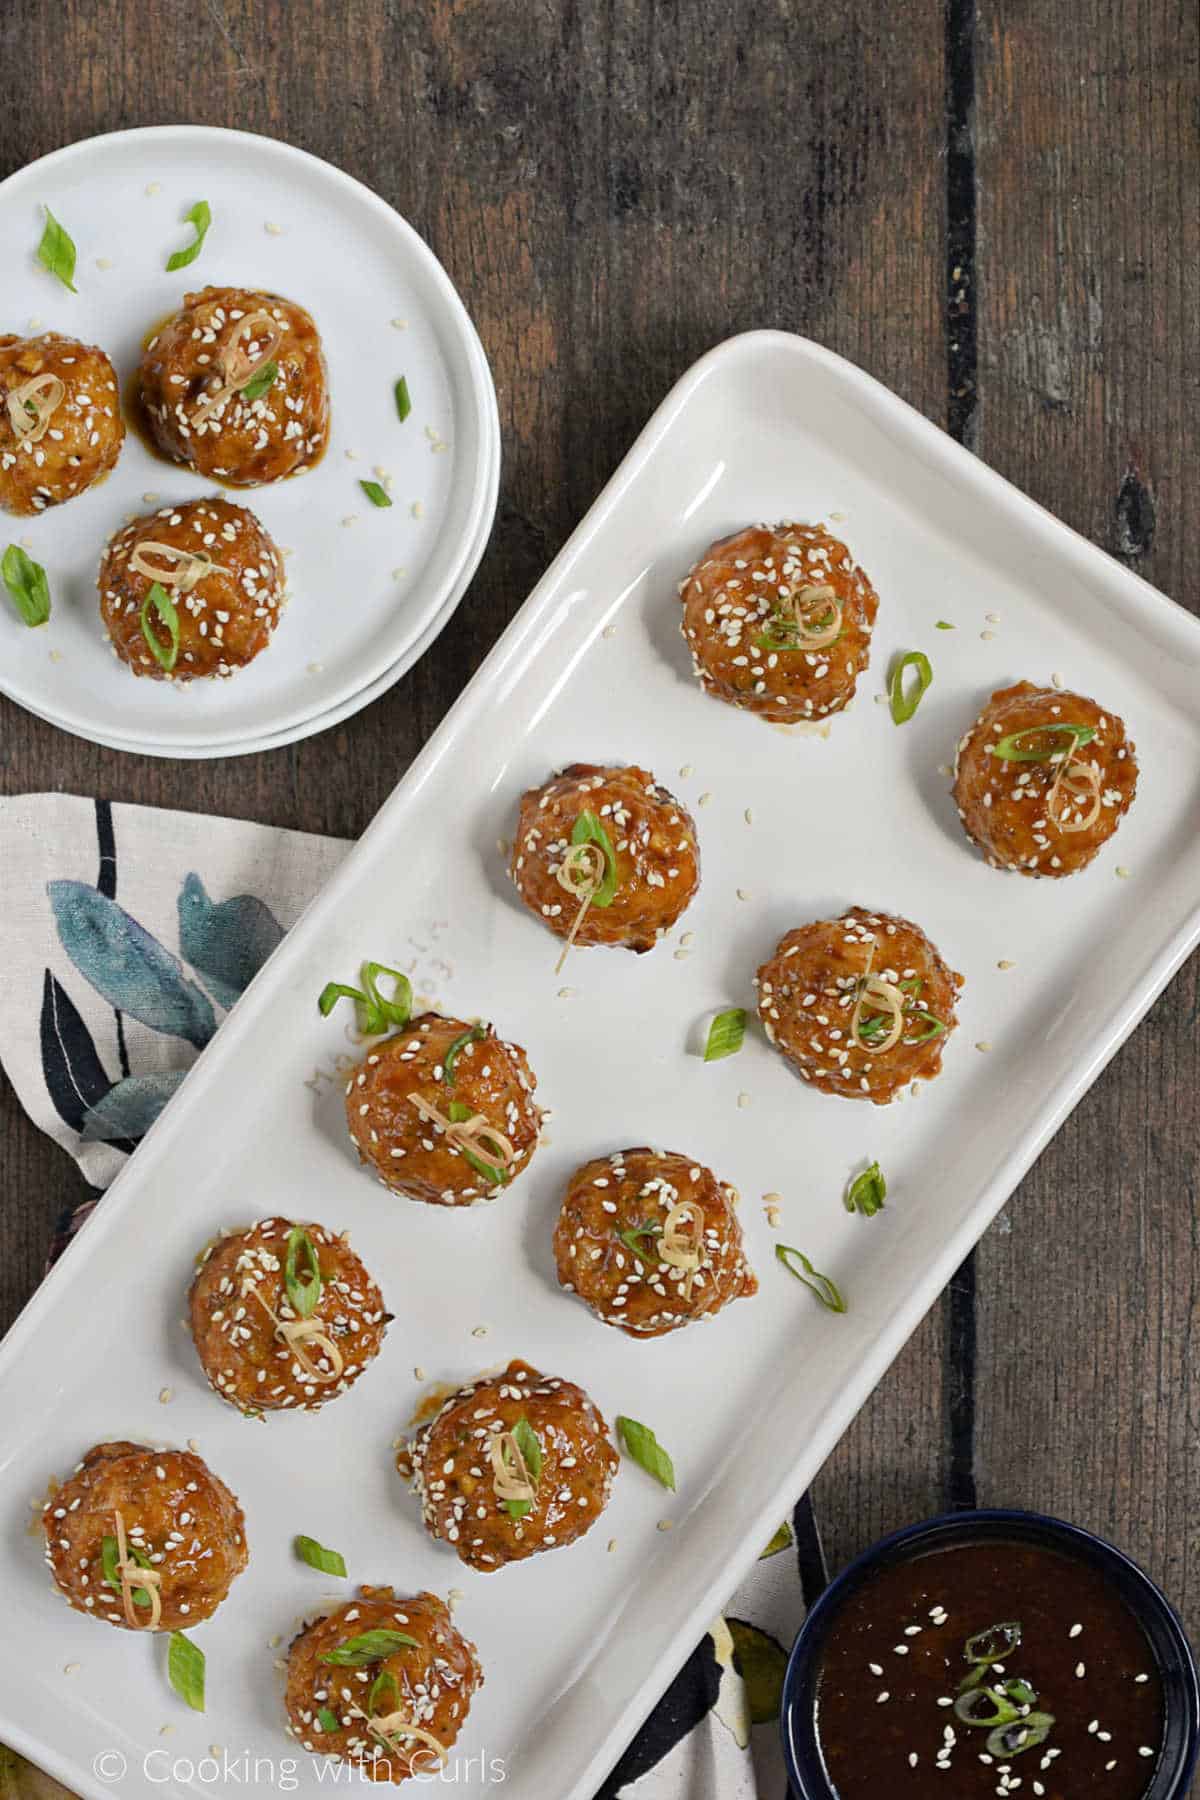 Ten teriyaki chicken meatballs on a platter, and three on a small plate.